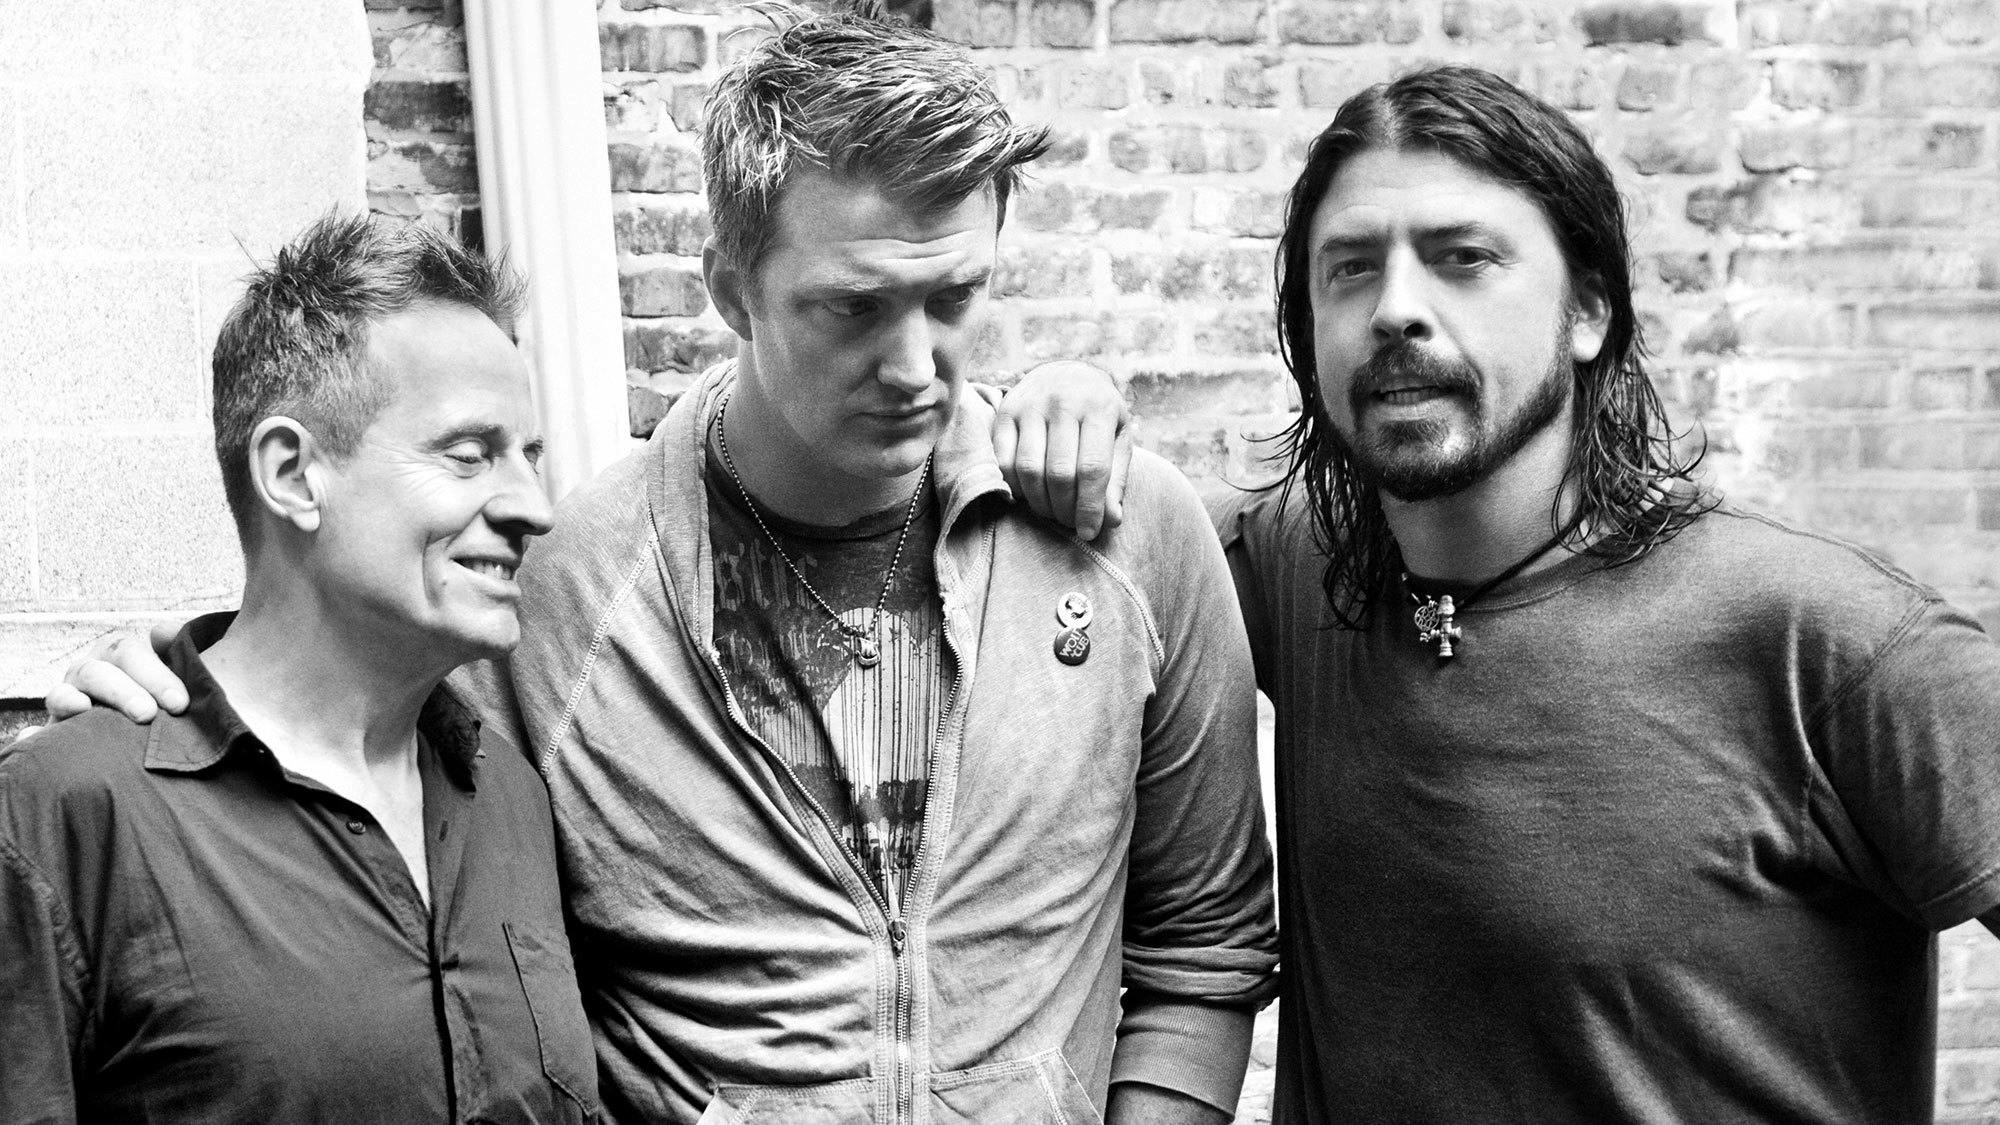 Dave Grohl on Them Crooked Vultures: "I hope that someday we do it again"